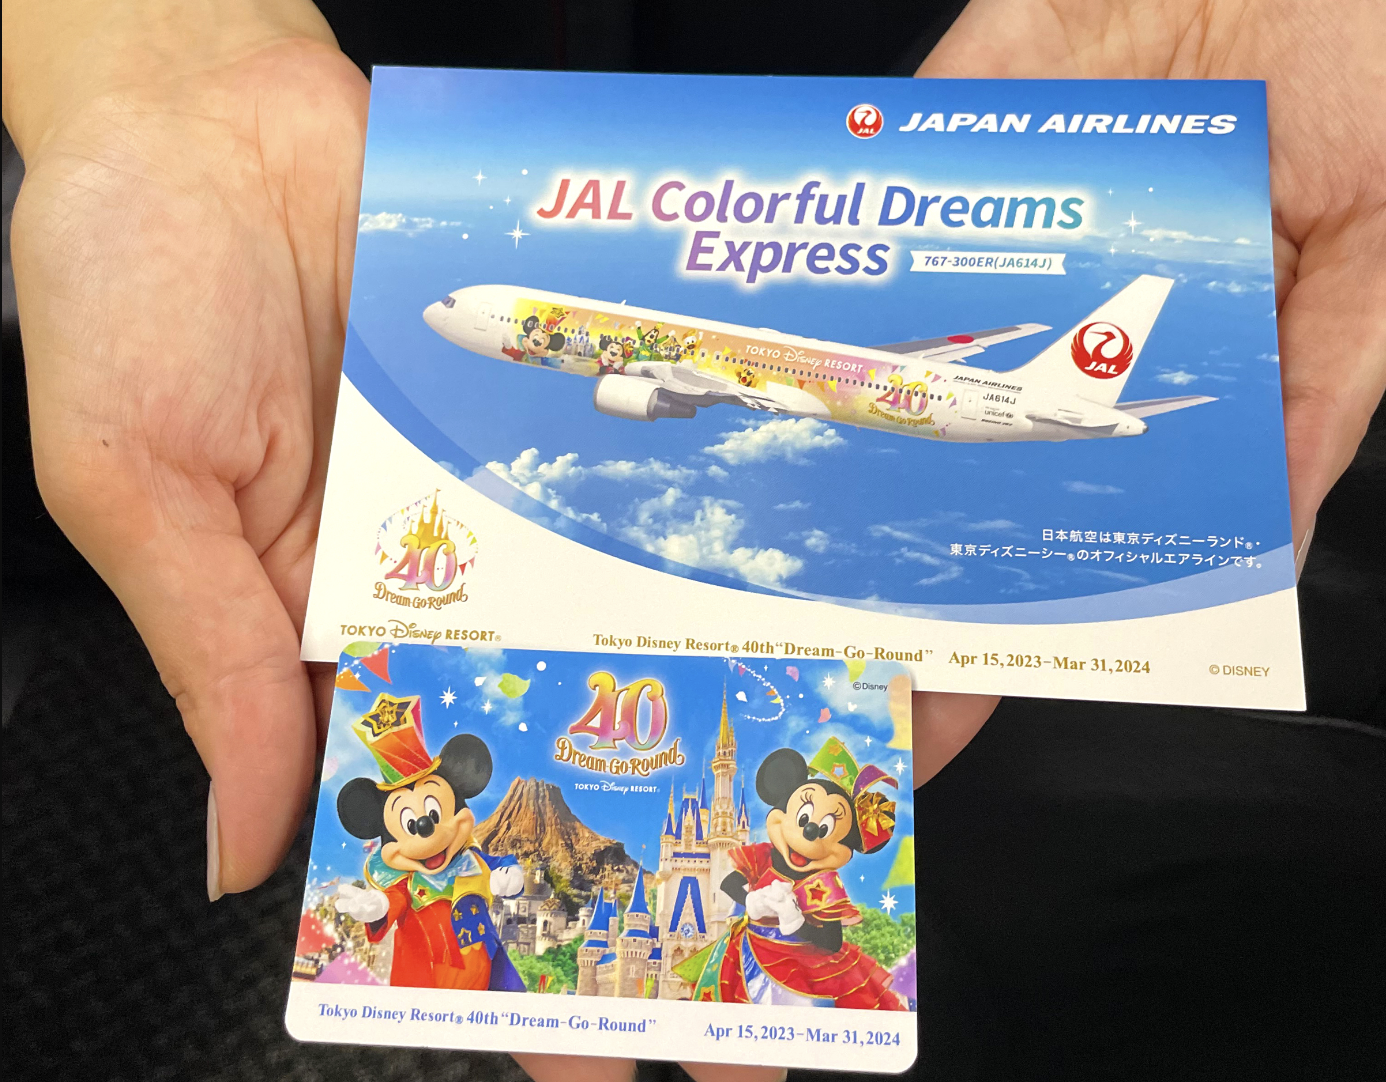 A NEW Disney Themed Airplane Is Here and We're Having Major FOMO